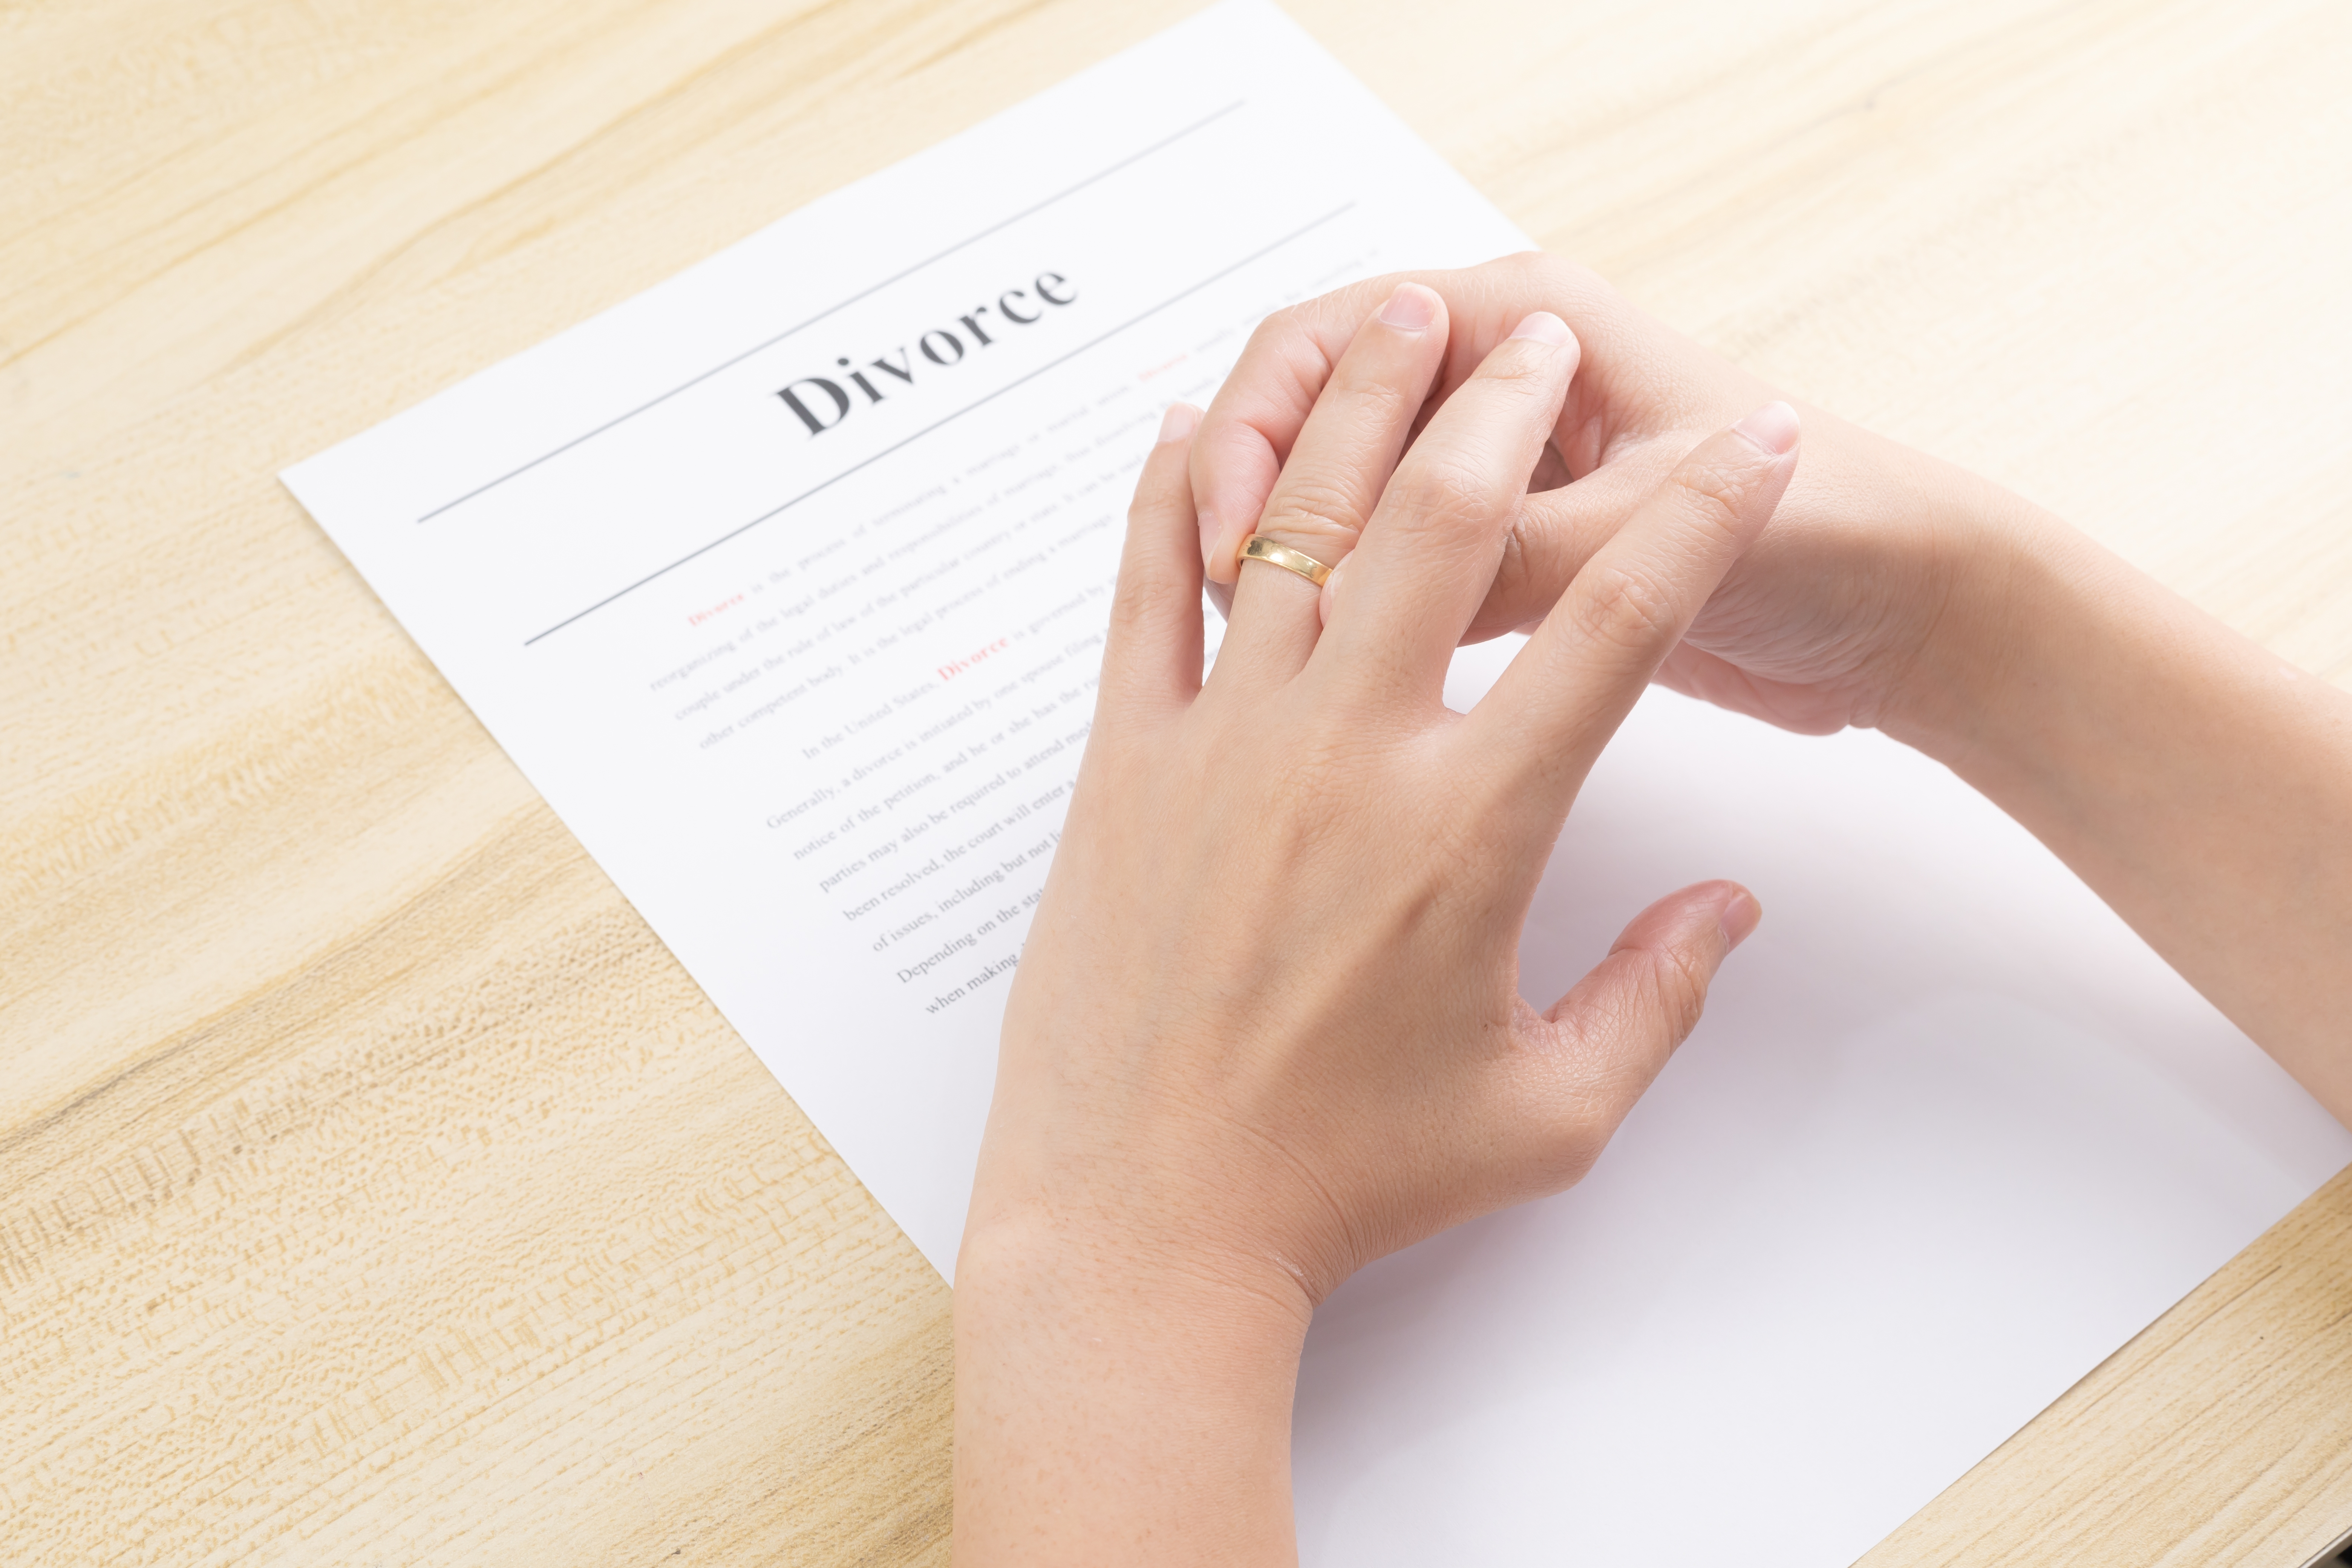 A hand over divorce papers | Source: Shutterstock